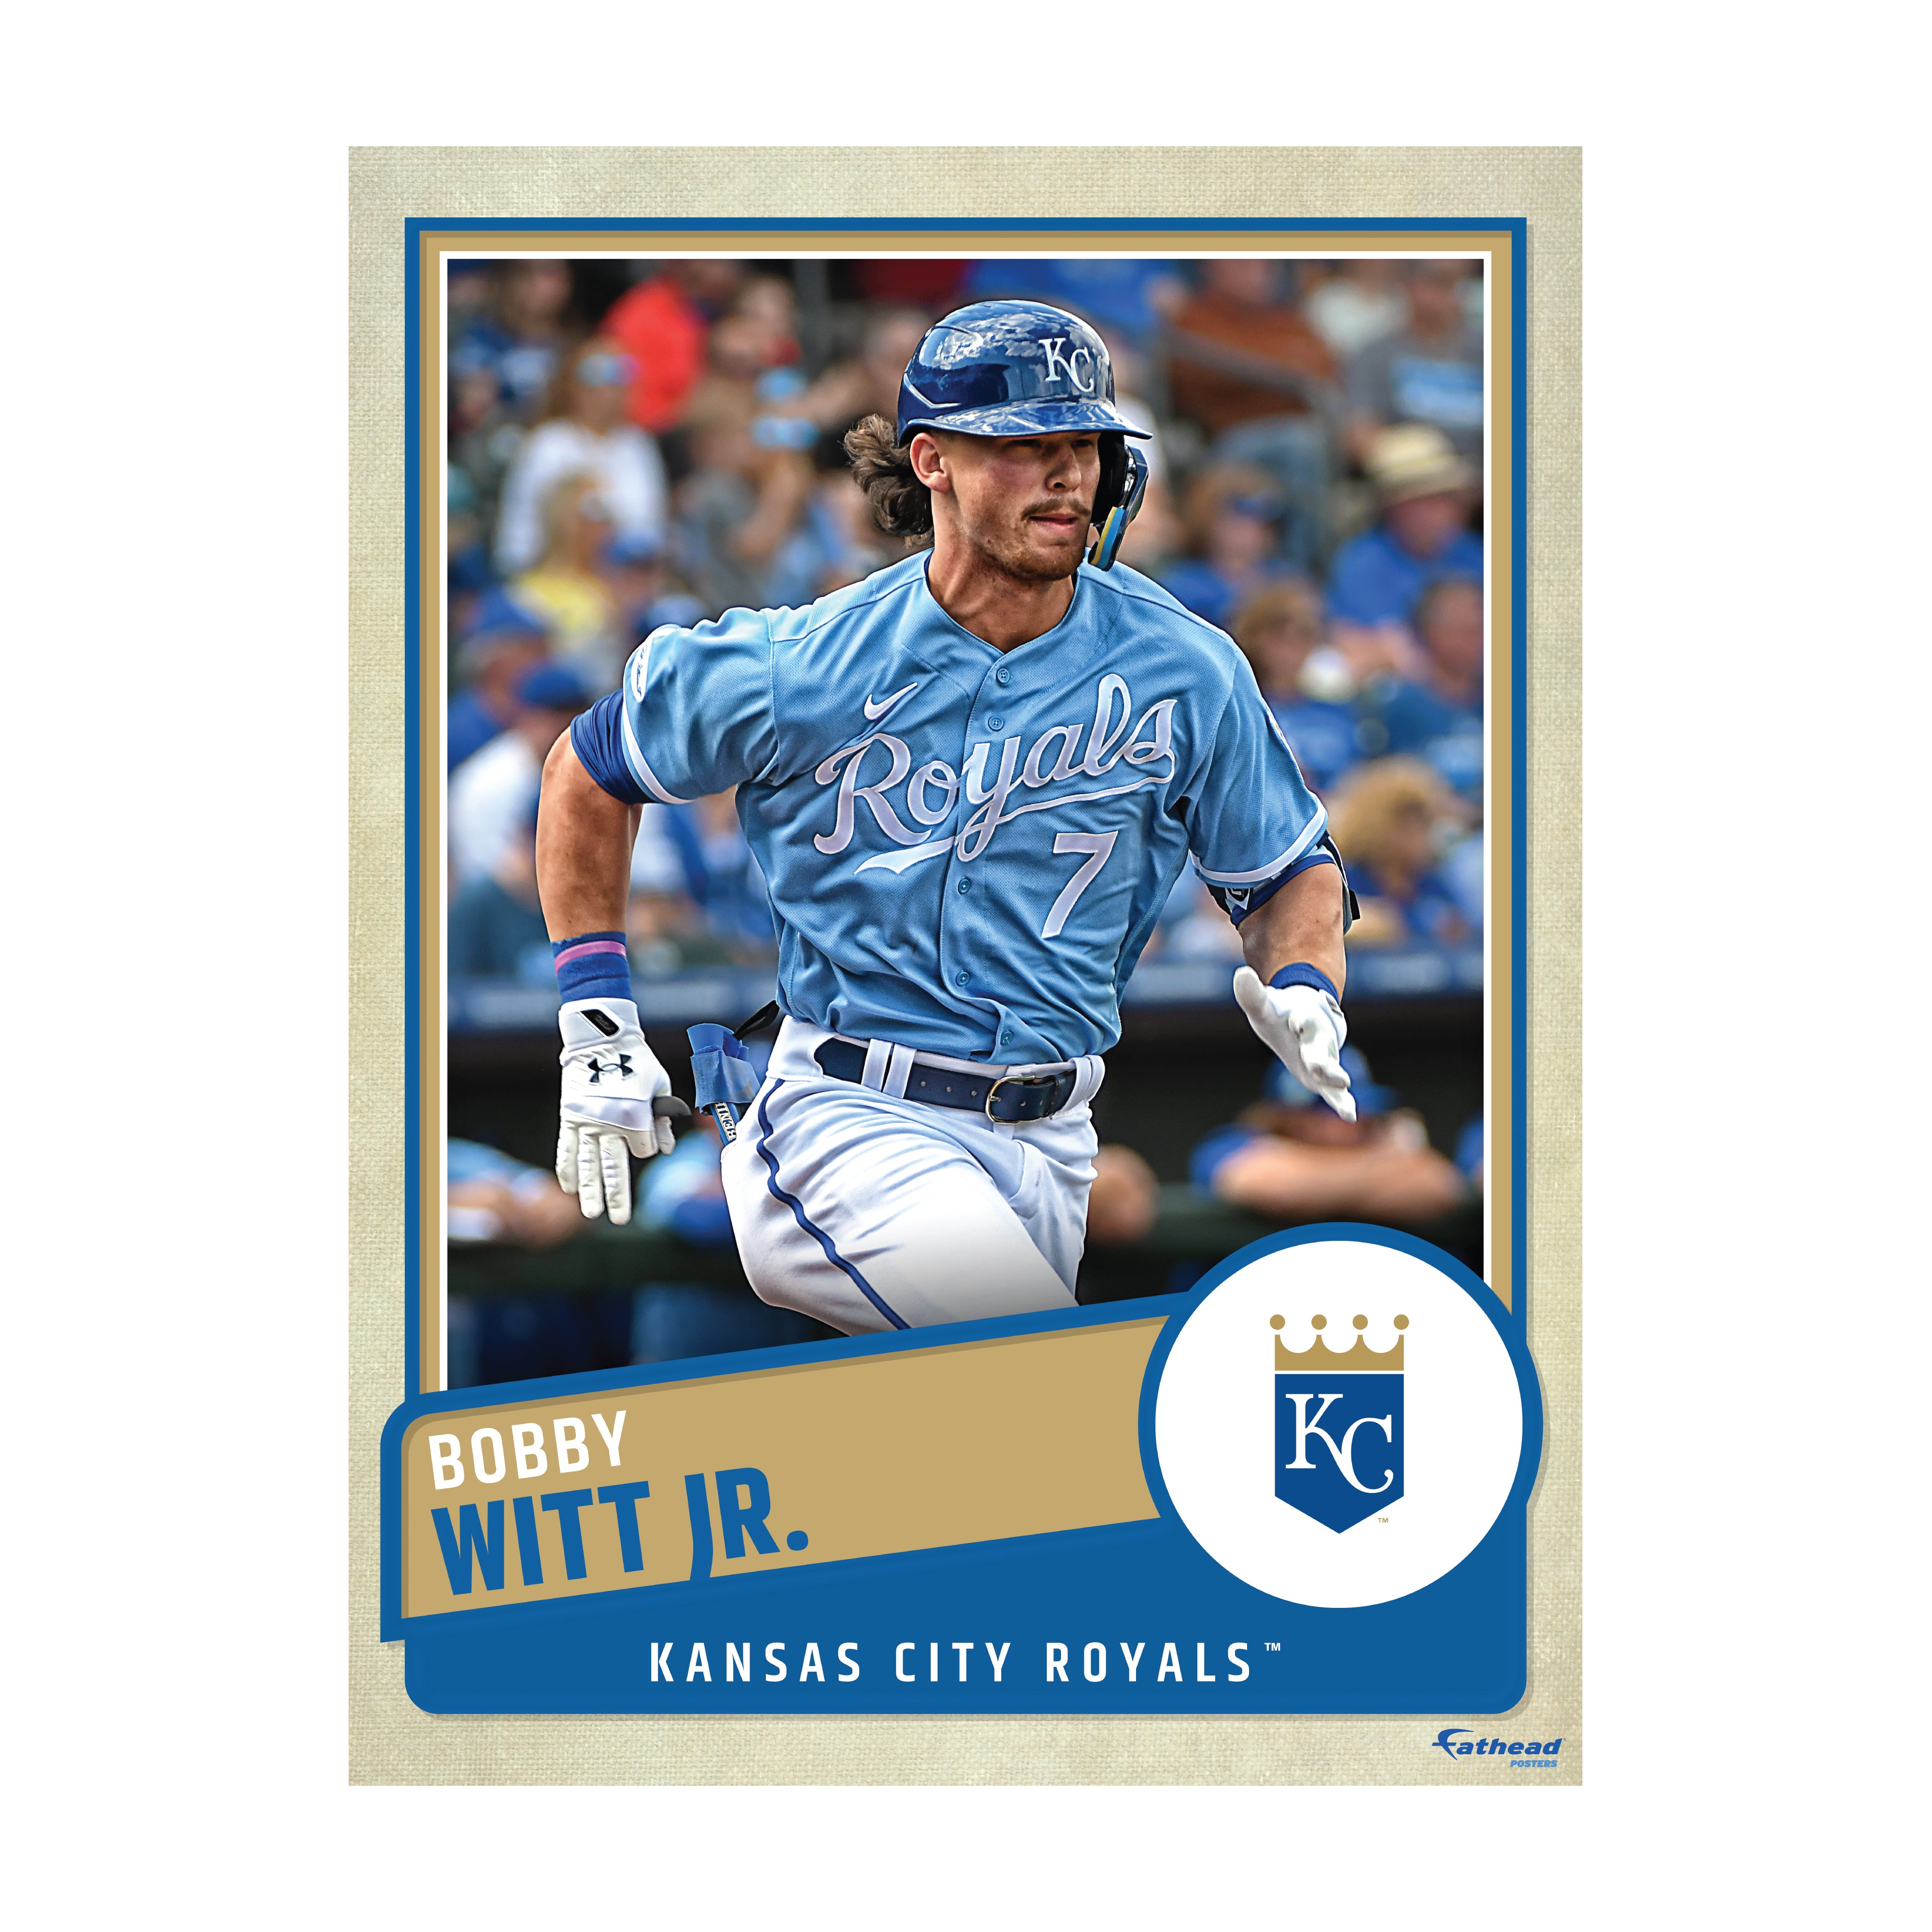 Kansas City Royals: Bobby Witt Jr. 2022 - MLB Removable Adhesive Decal  Giant Athlete +2 Decals 21W x 51H